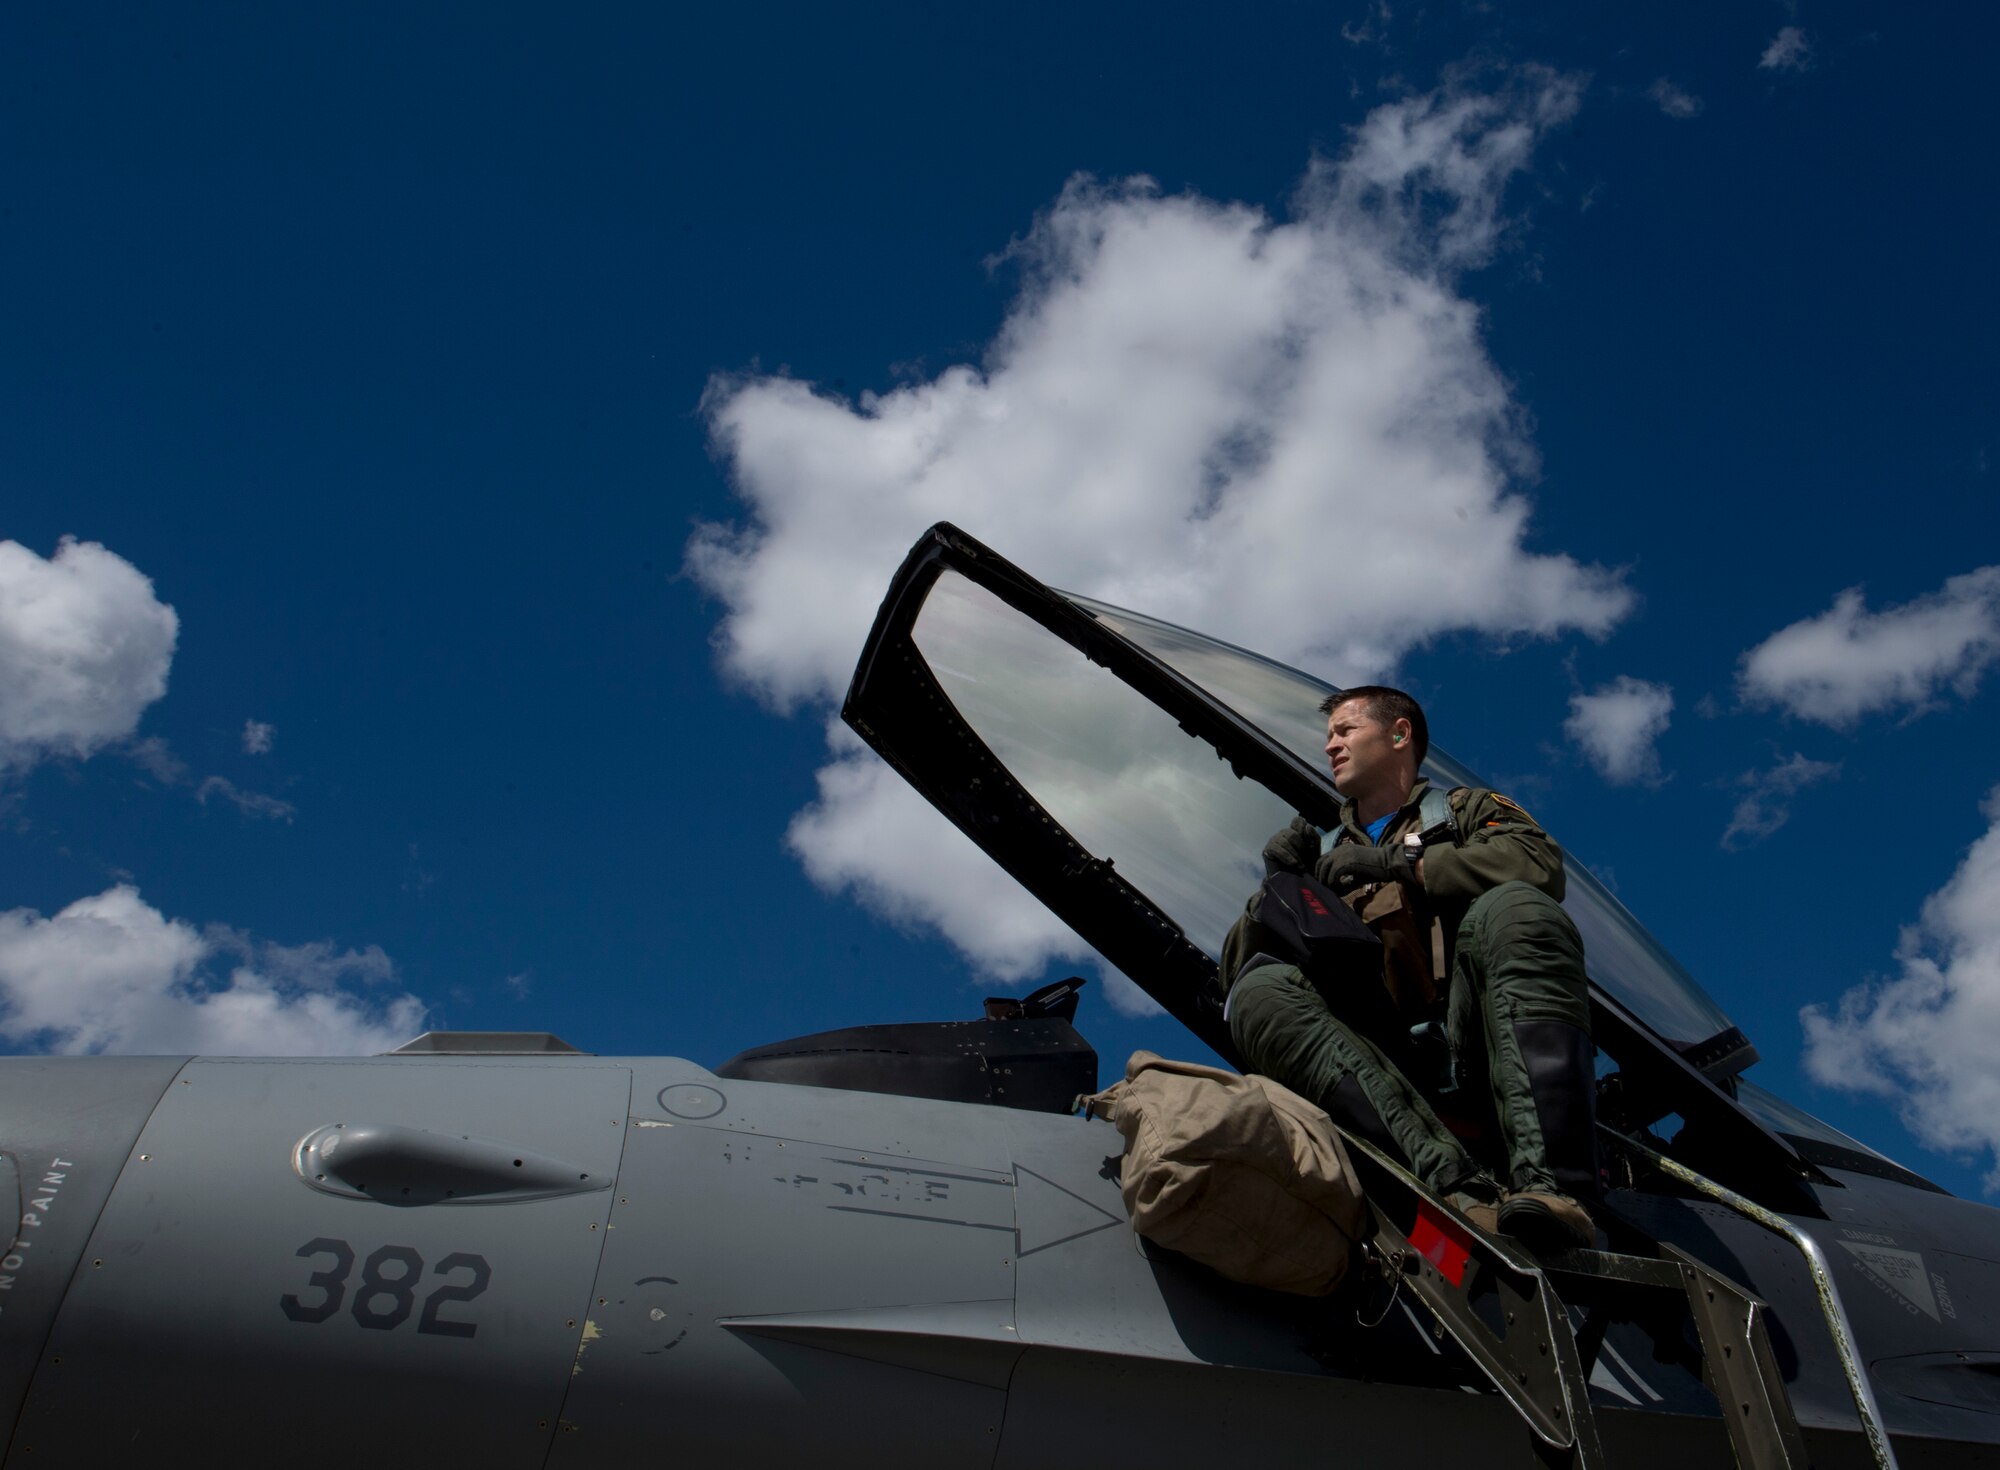 U.S. Air Force fighter pilot, Lt. Col. Ryan Ley, assigned to the 14th Fighter Squadron prepares for a flight on an F-16 during RED FLAG-Alaska 17-2 June 16, 2017, at Eielson Air Force Base, Alaska. RED FLAG-Alaska provides an optimal training environment in the Indo-Asia Pacific Region and focuses on improving ground, space, and cyberspace combat readiness and interoperability for U.S. and international forces.  (U.S. Air Force photo by Airman 1st Class Haley D. Phillips)